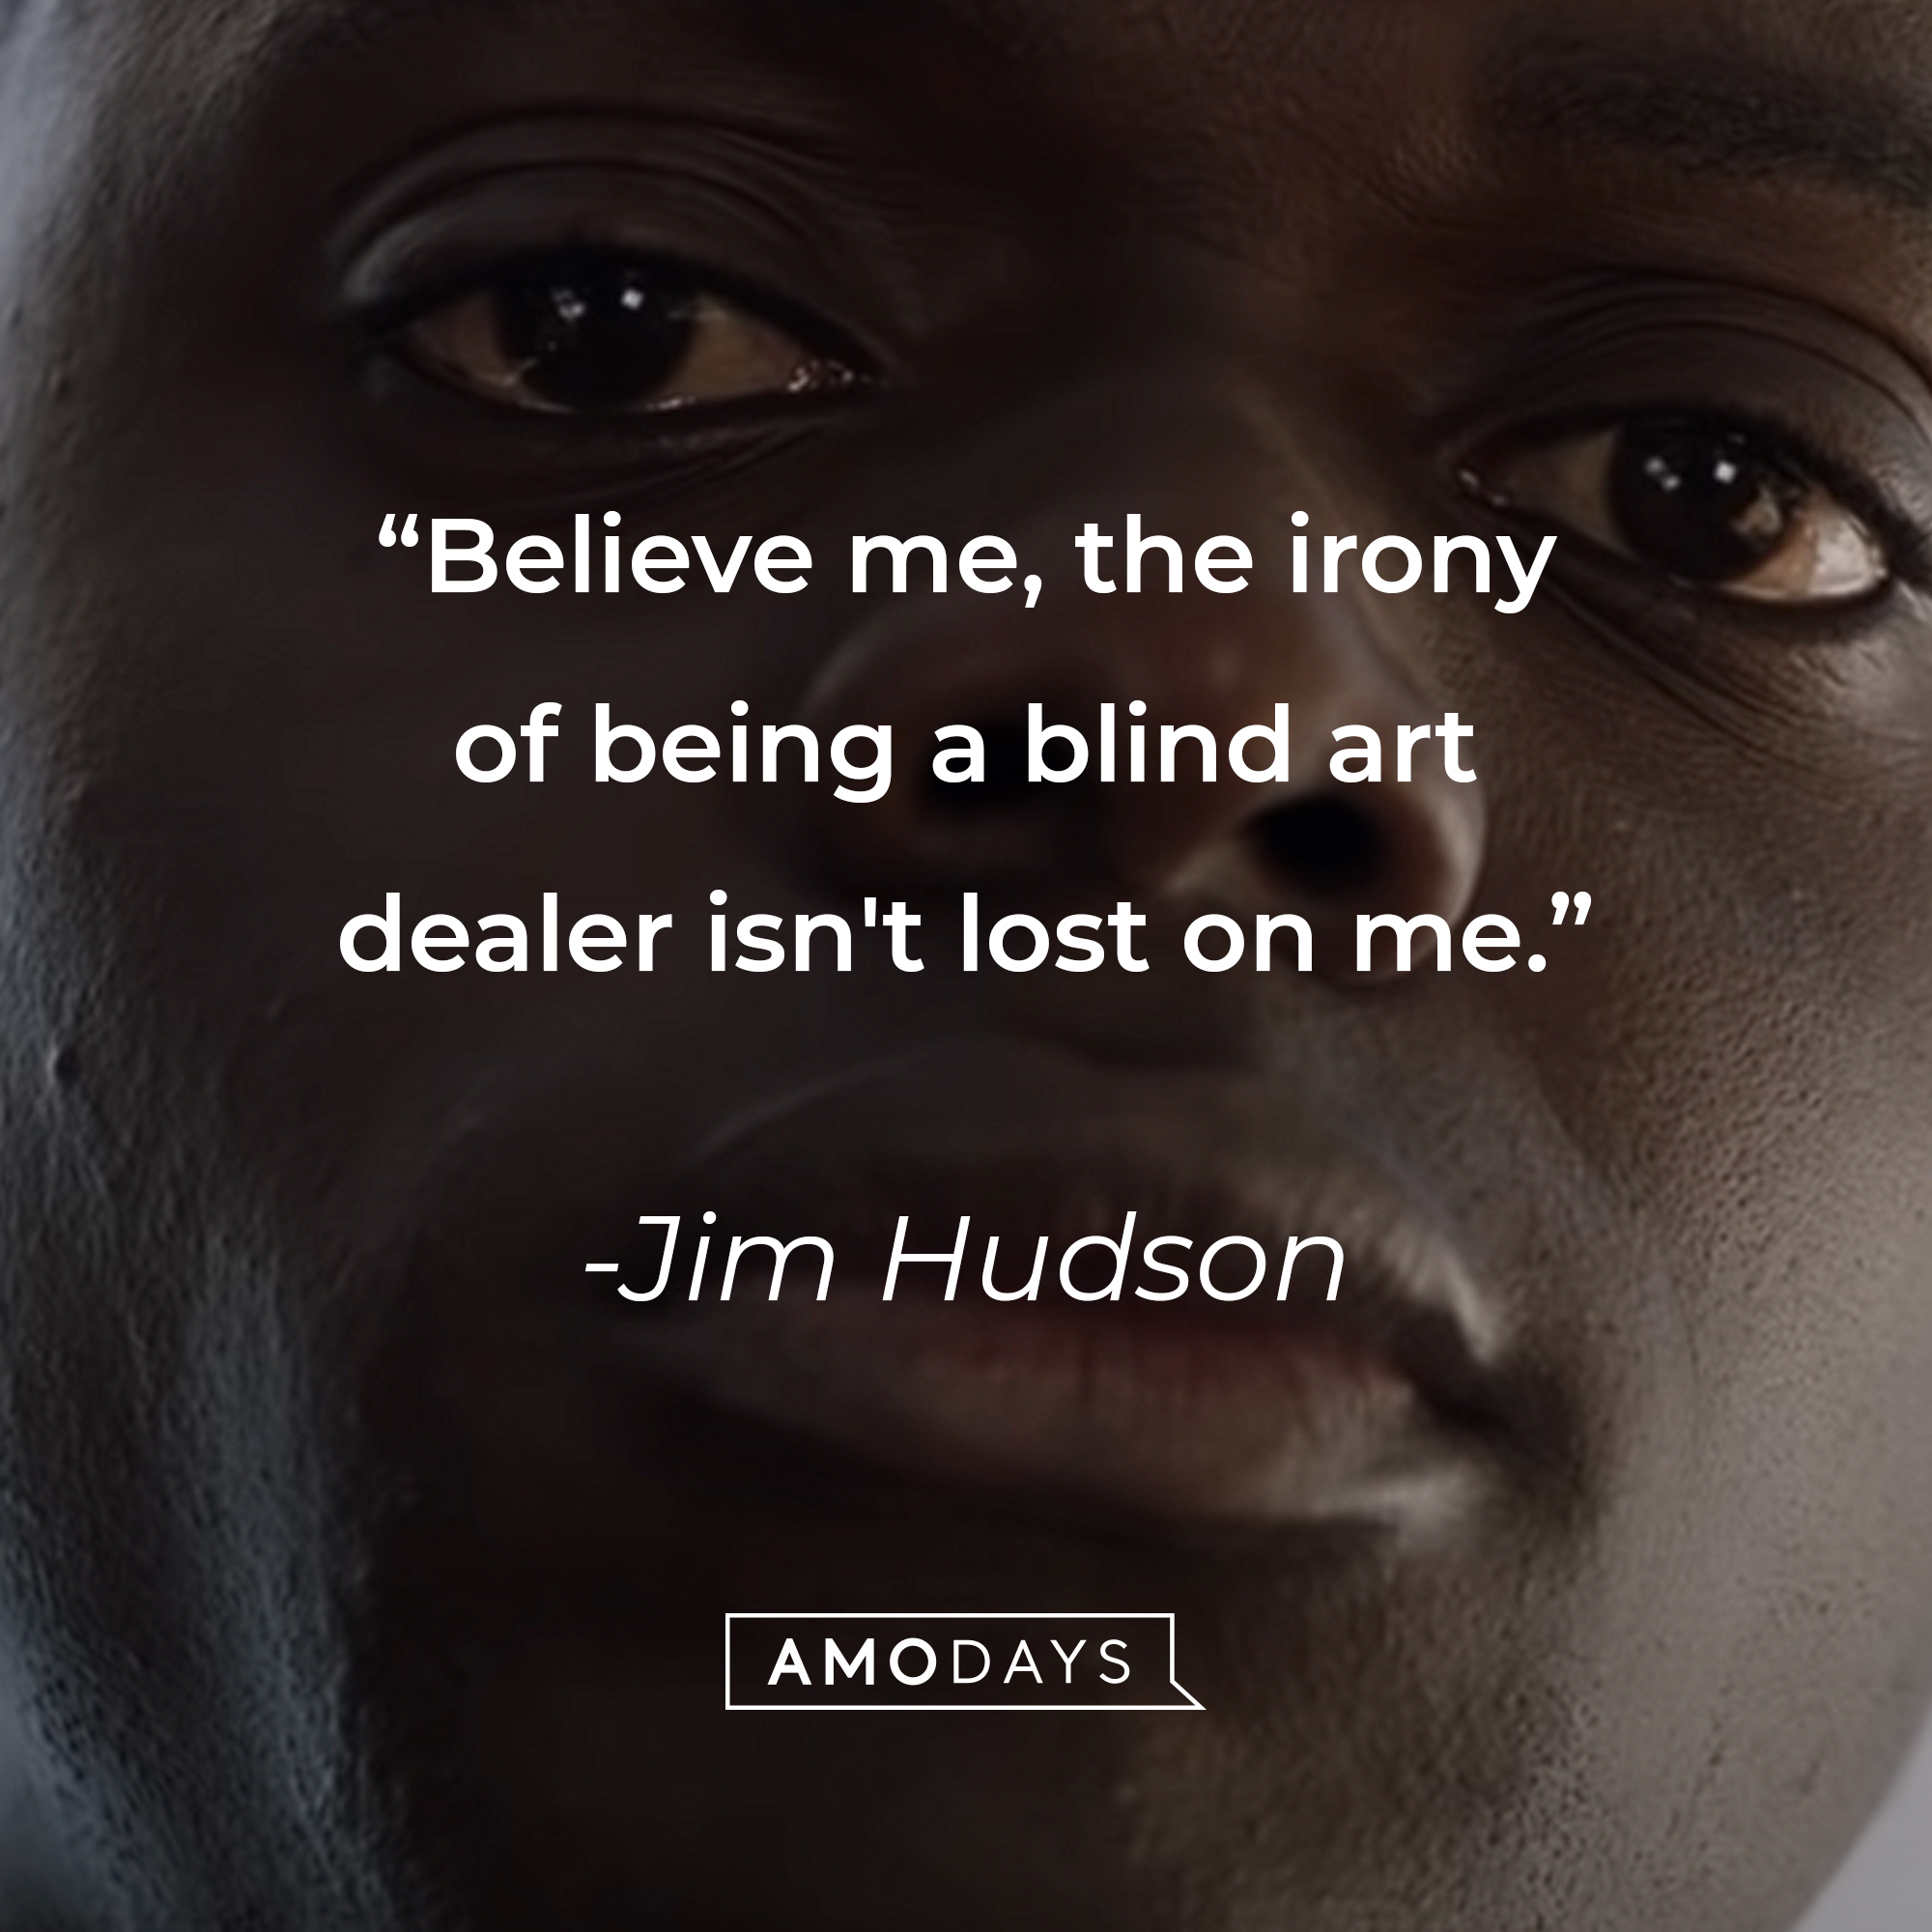 An image of Chris Washington with Jim Hudson’s quote:  “Believe me, the irony of being a blind art dealer isn't lost on me.” | Source: youtube.com/UniversalpicturesIta